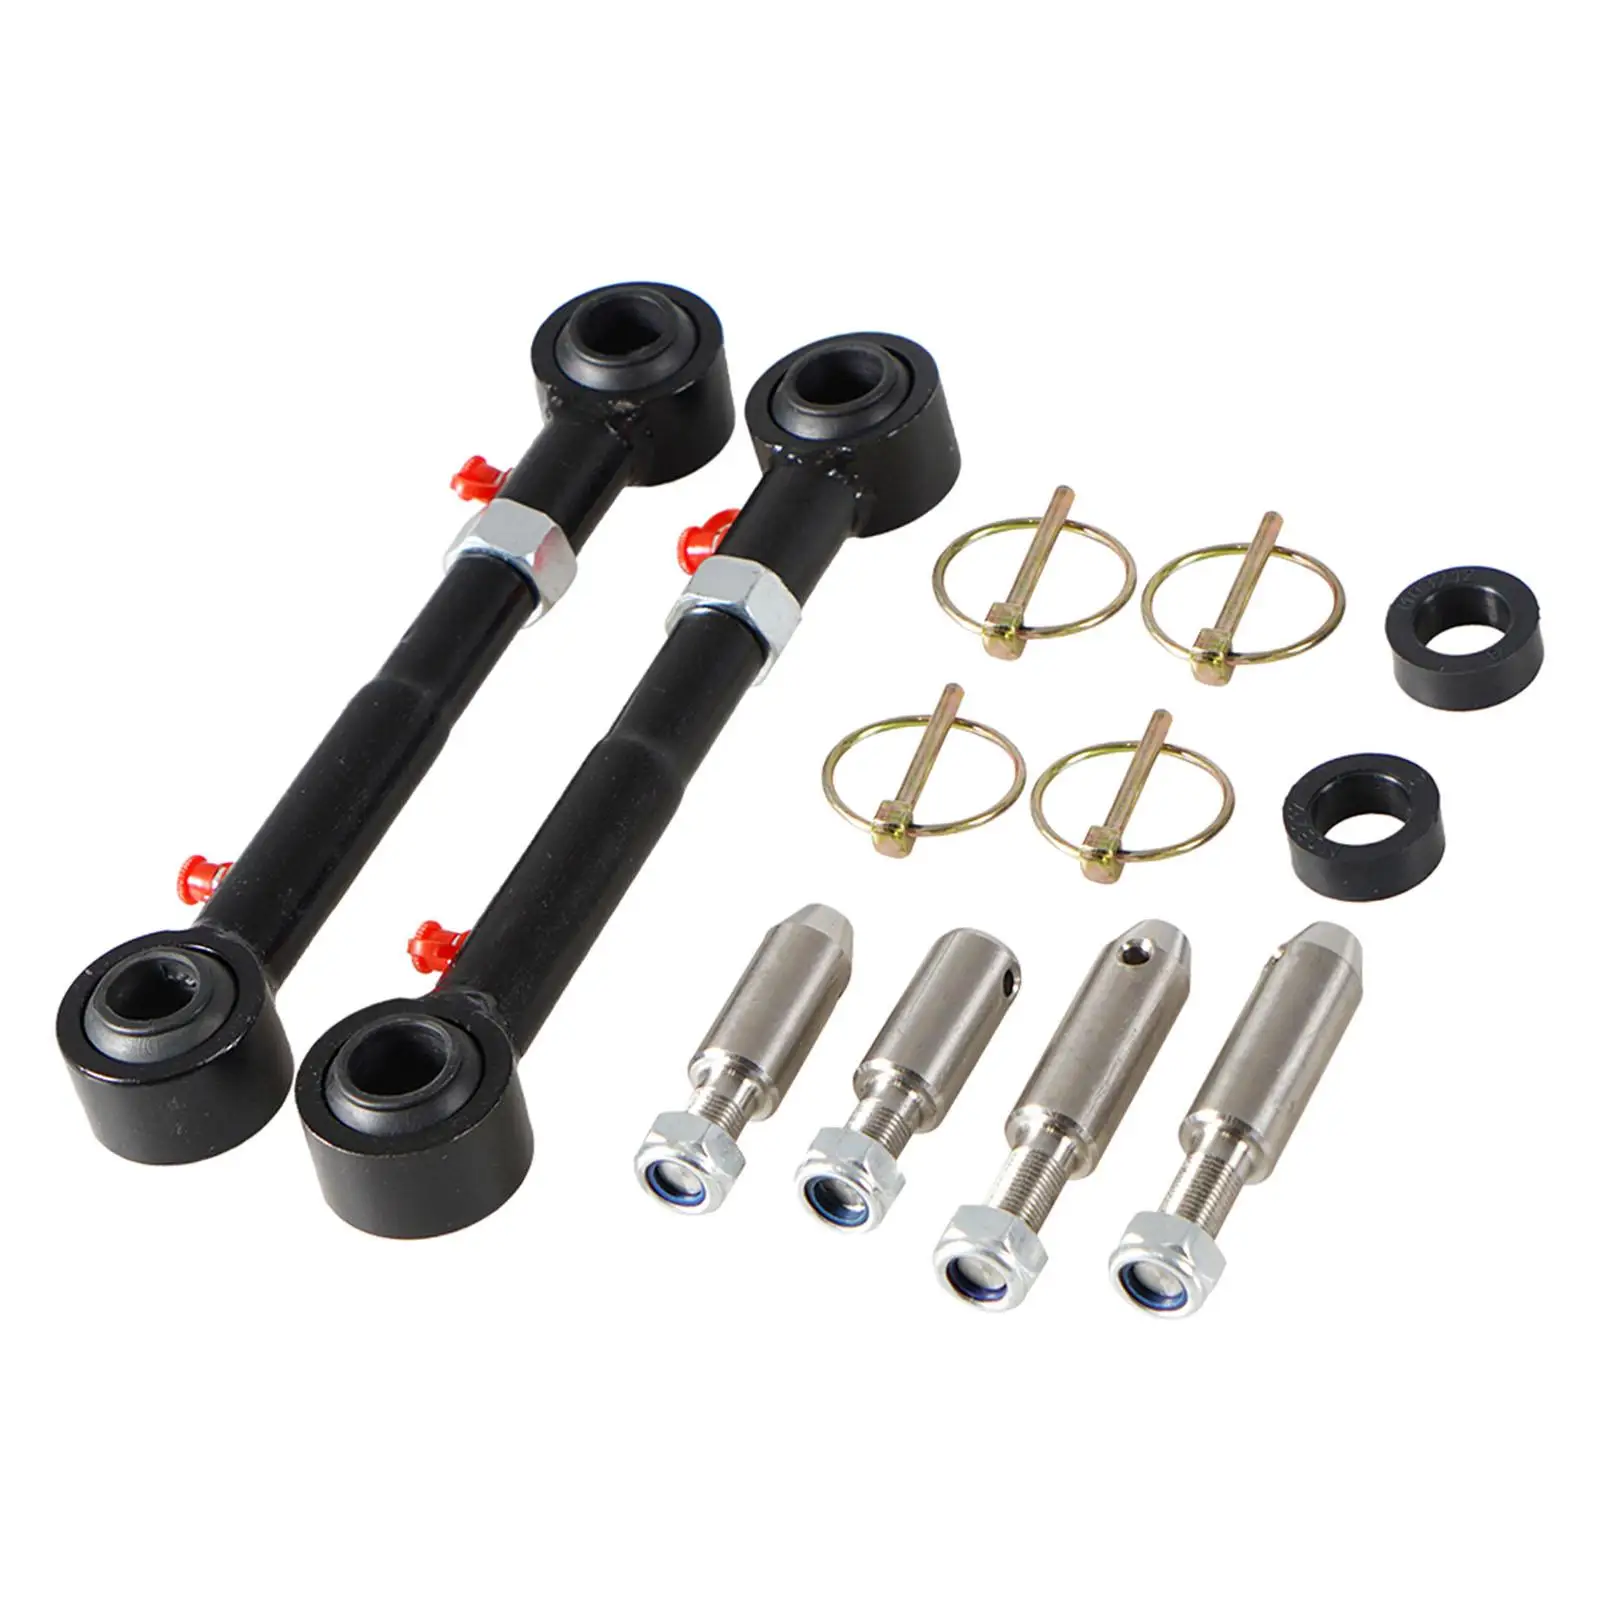 Front Sway Bar Links Disconnects Fits for Jeep Wrangler JK 2/ 2007-18